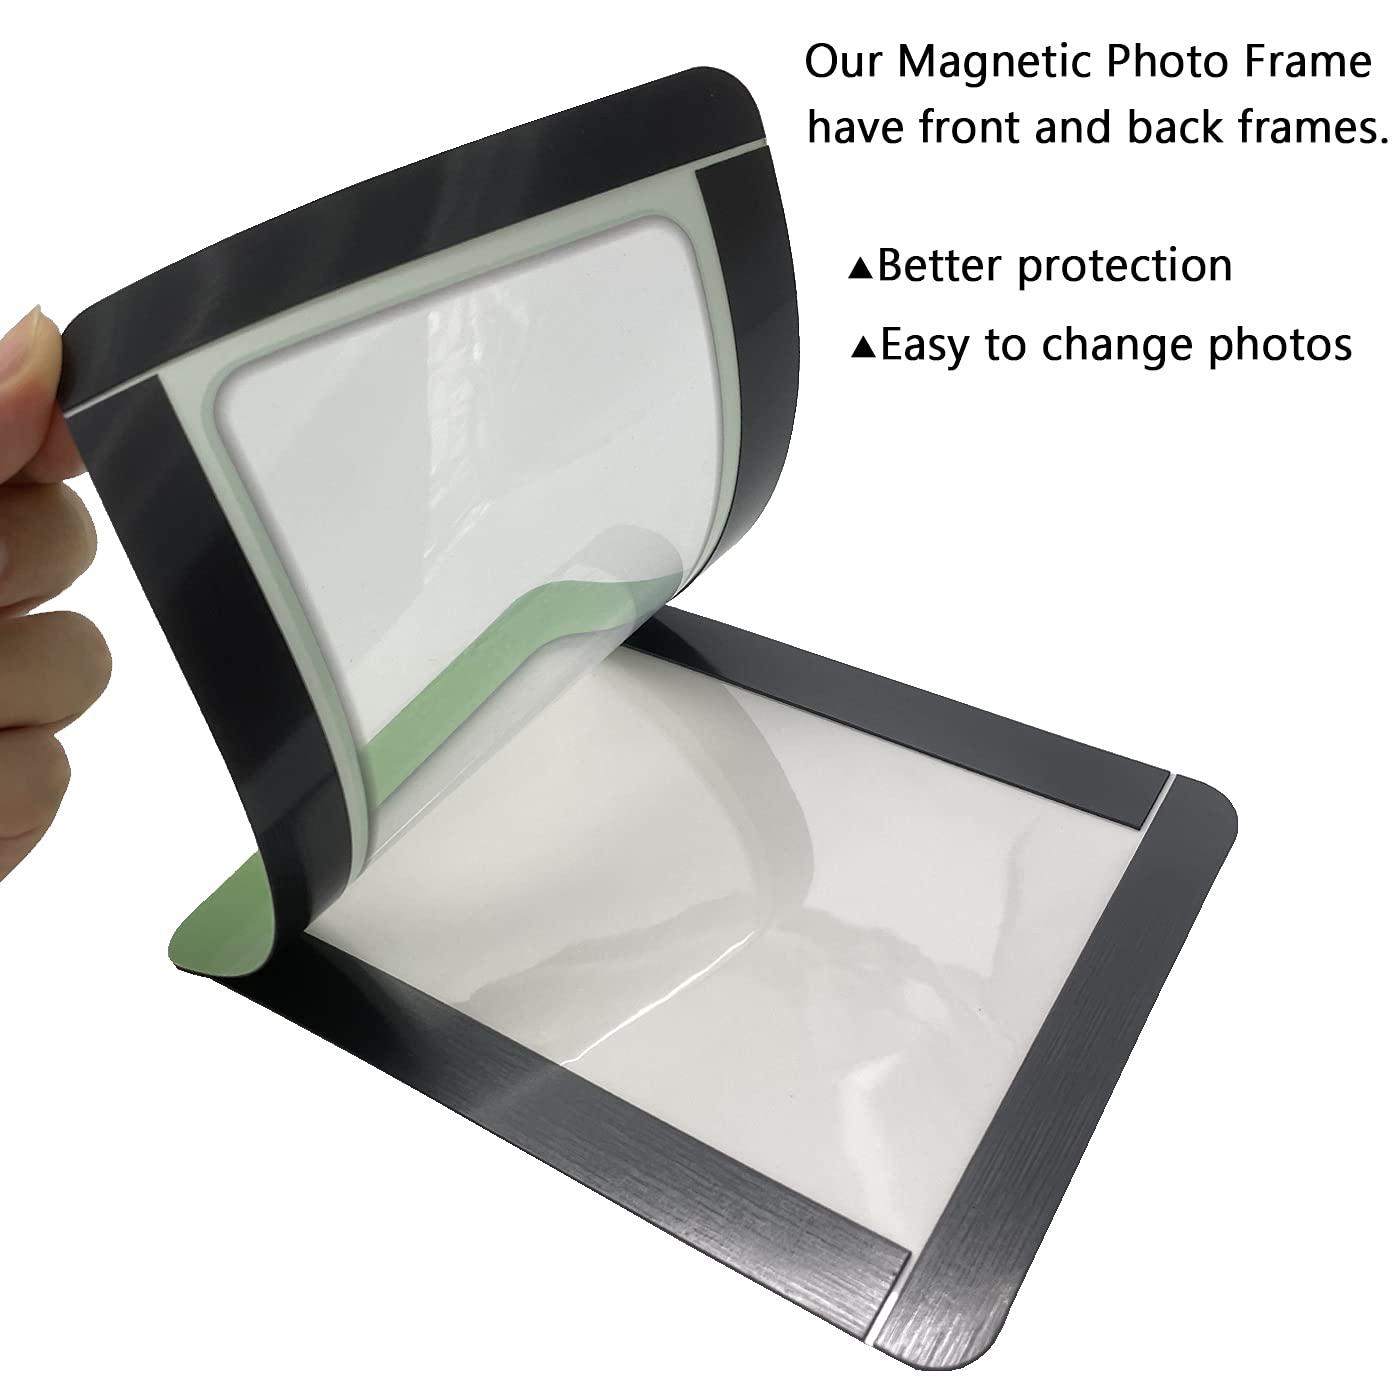 YQBOOM birsppy magnetic photo frames yqboom 5 pack